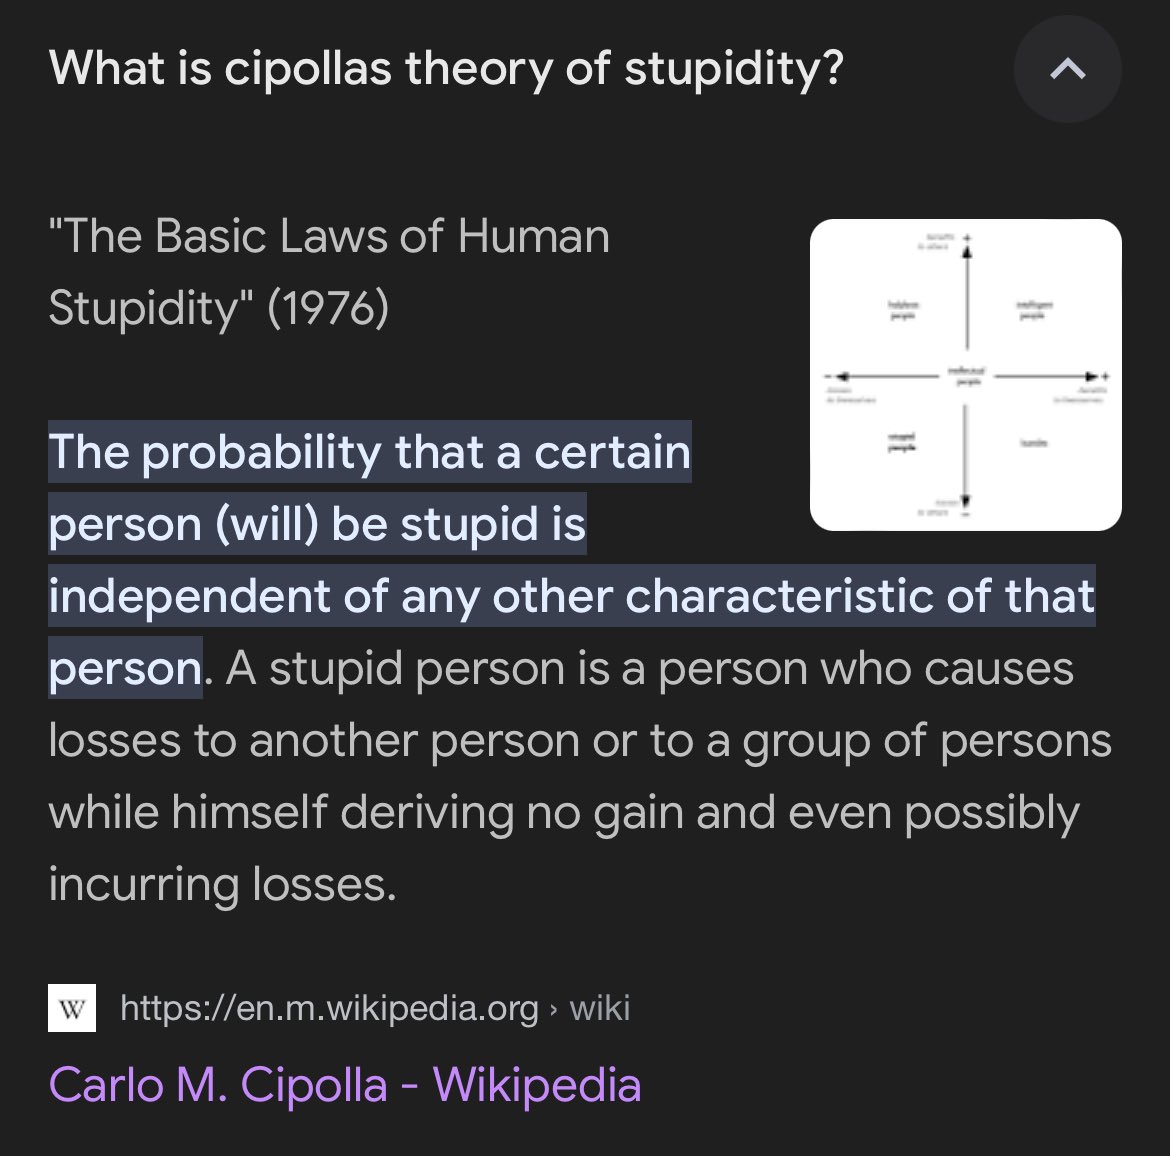 Cippola’s basic laws of human stupidity explains a lot of why people are supporting extreme right wing ideologies and why the leaders are exploiting them. #ableg #abpoli #EnoughIsEnoughUCP #Christofascist #DanielleSmithisaLiar #DanielleSmithIsAFascist #NeverVoteConservative